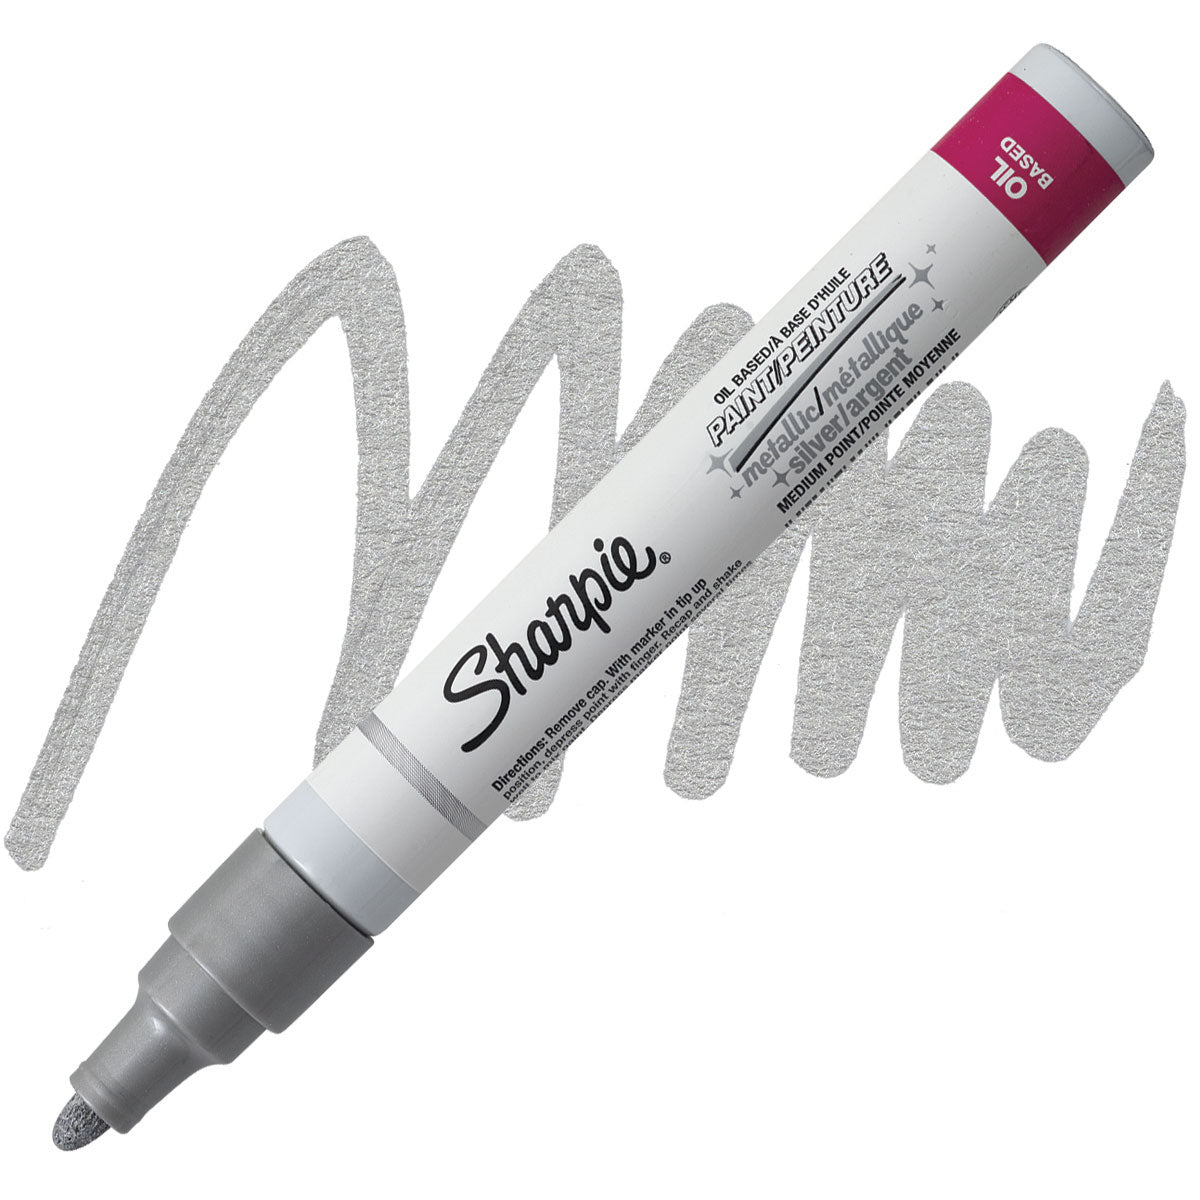 Sharpie Oil-Based Paint Marker - Extra Fine Point - Metallic Silver